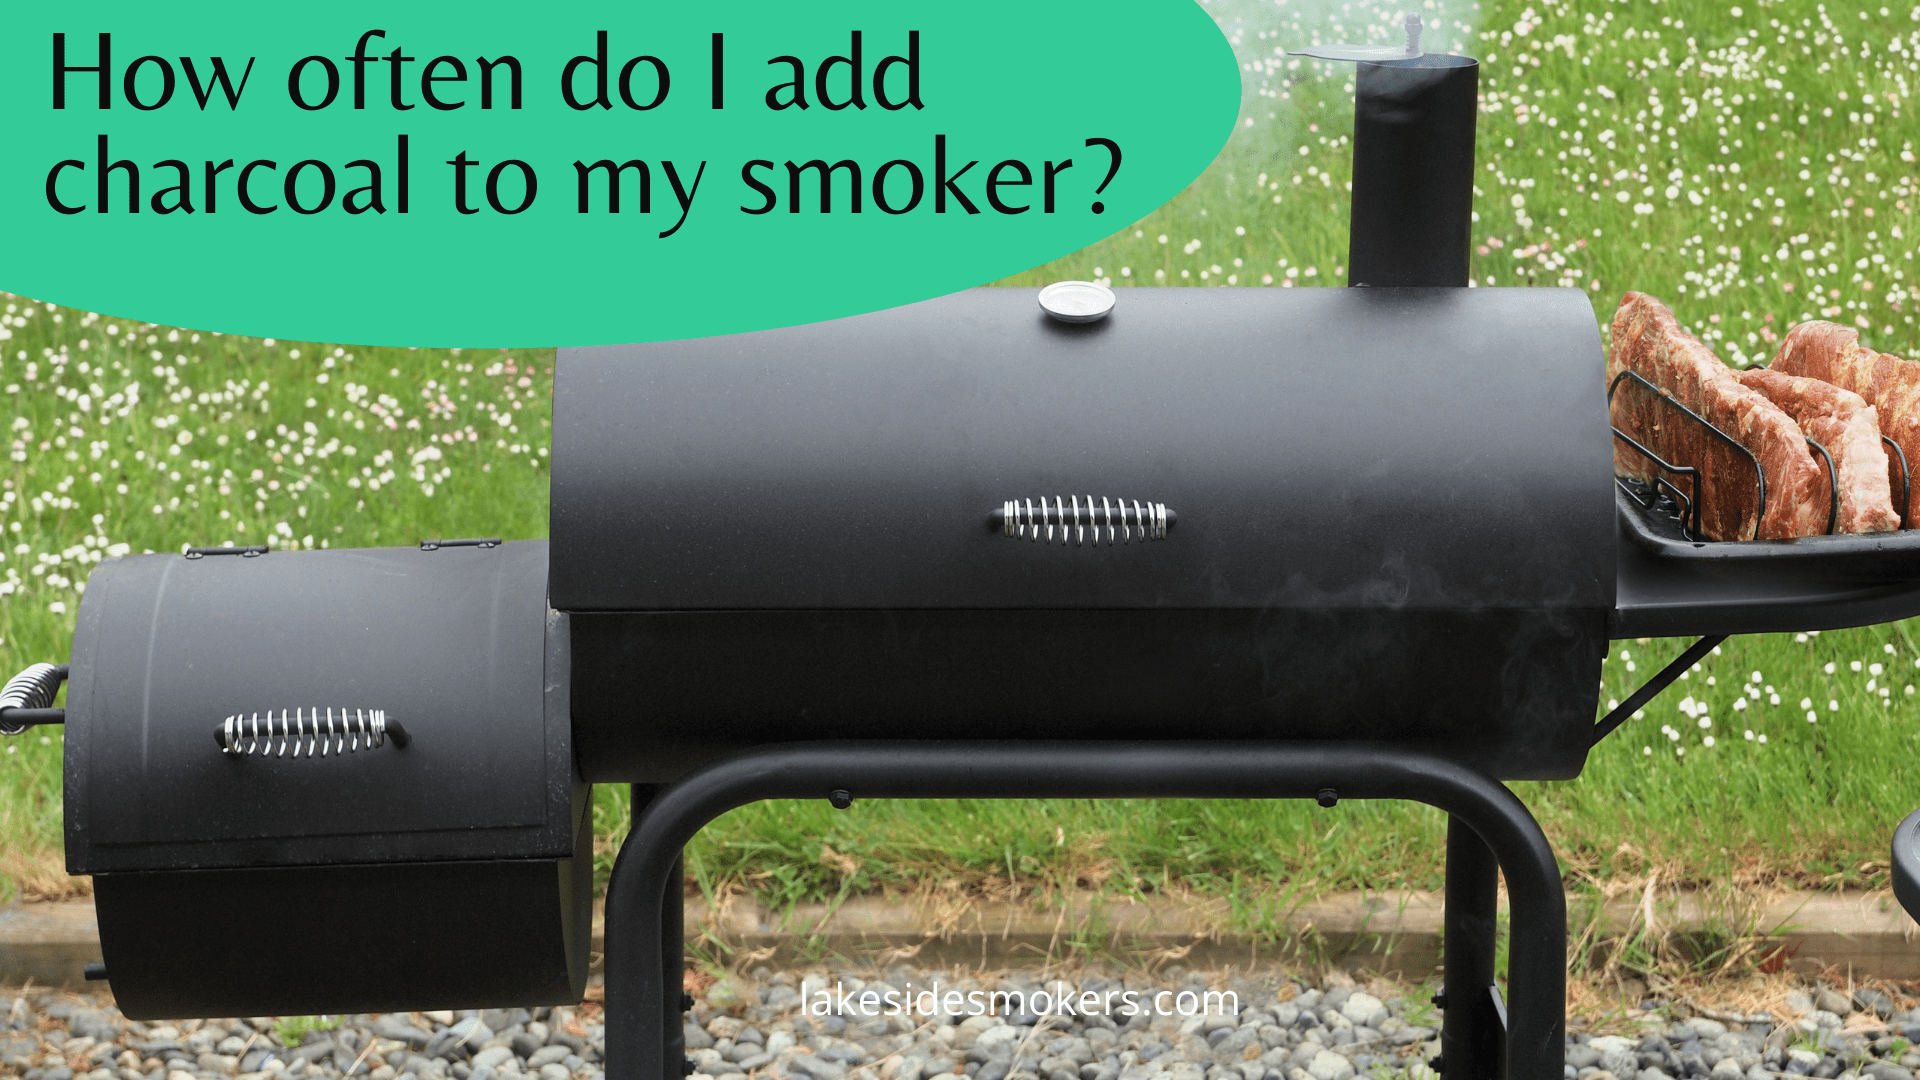 How often do I add charcoal to my smoker? Check the temperature